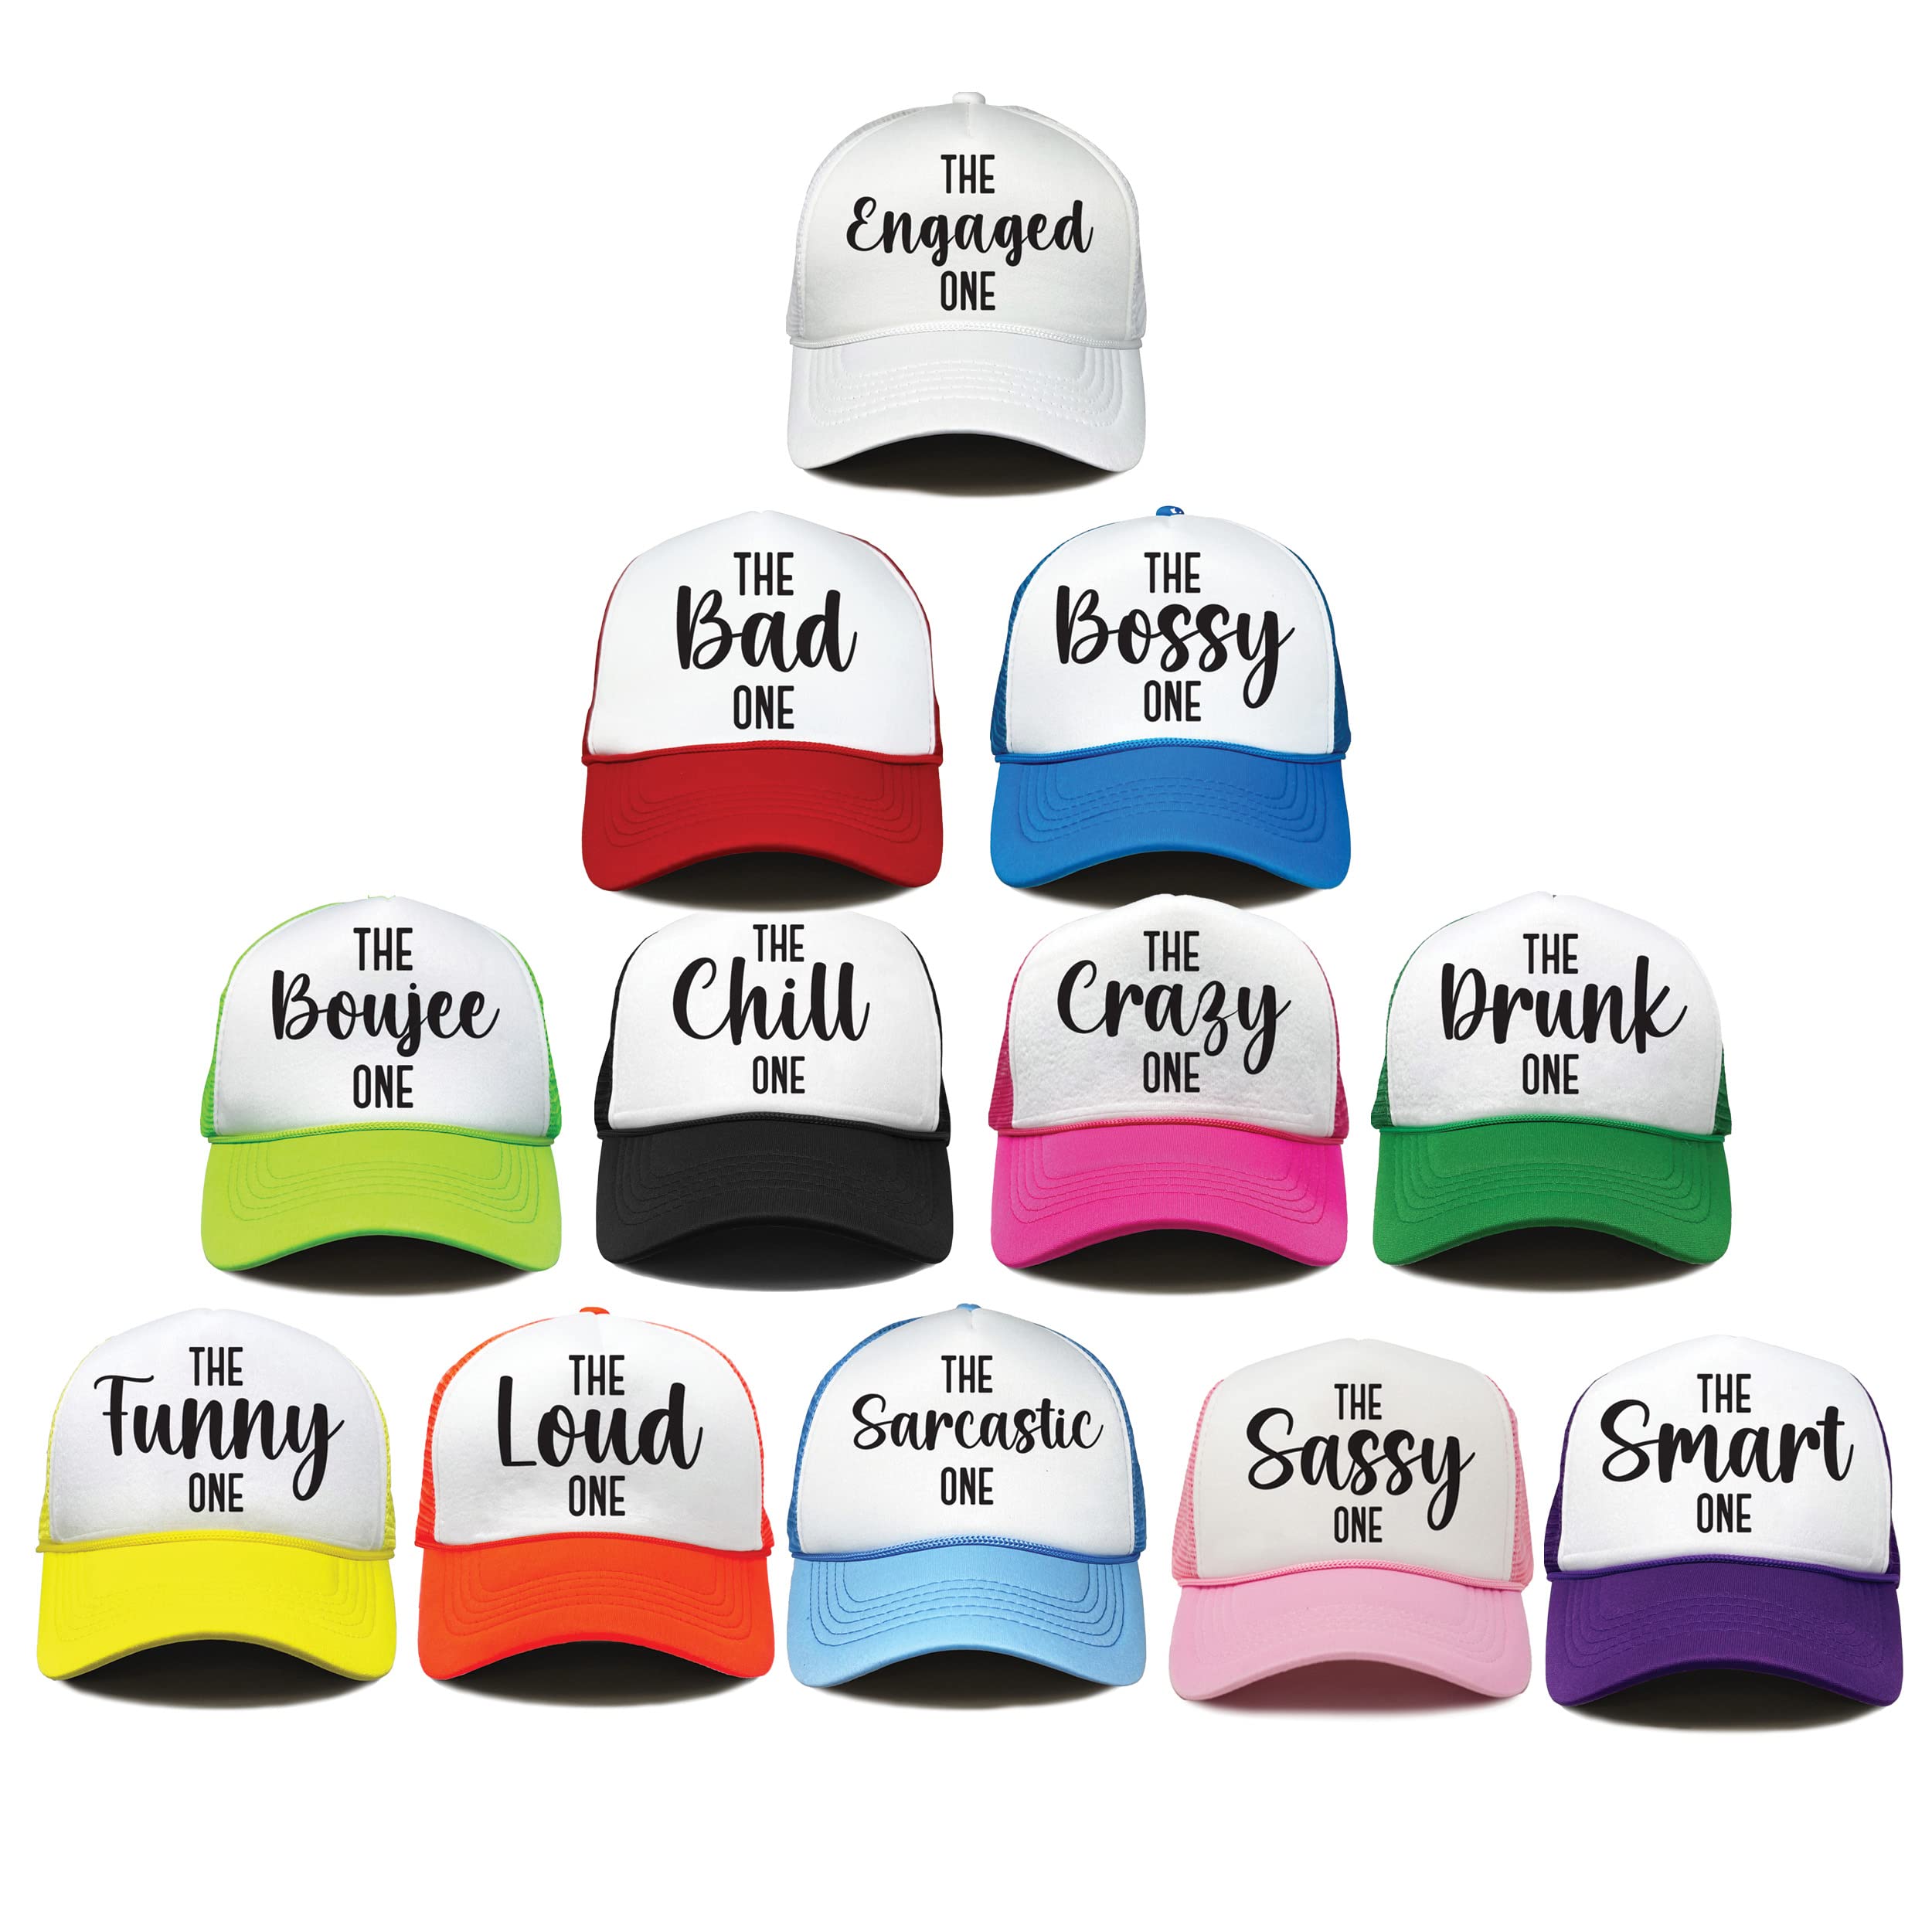 Trucker Party Hats - 12 Pack - Bossy Bad Boujee Crazy Chill Drunk Engaged Loud Funny Smart Sassy Sarcastic